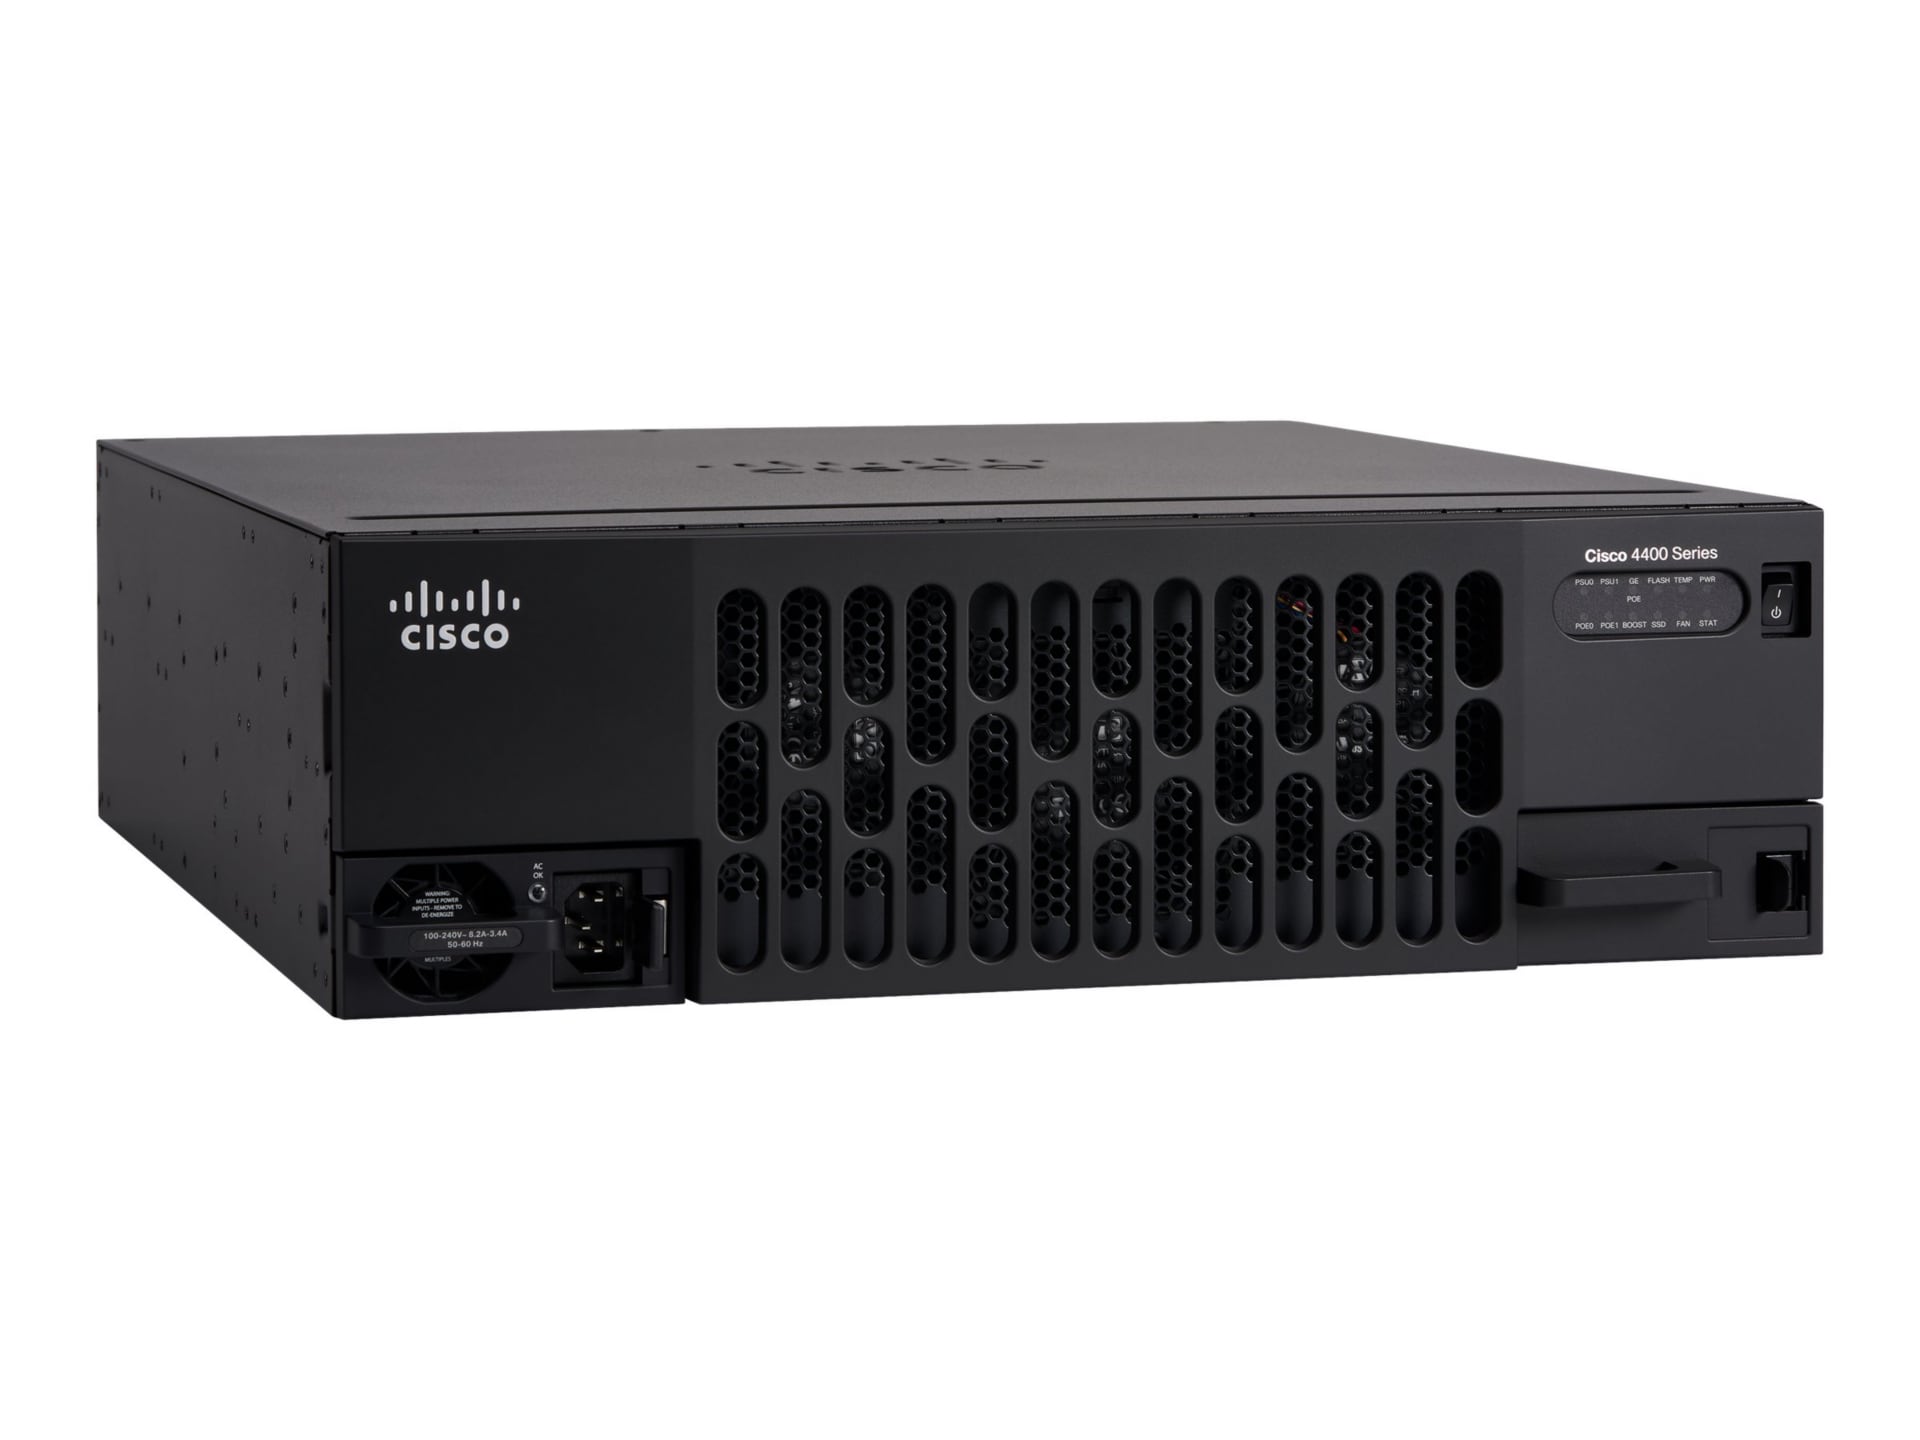 cisco router iso image download